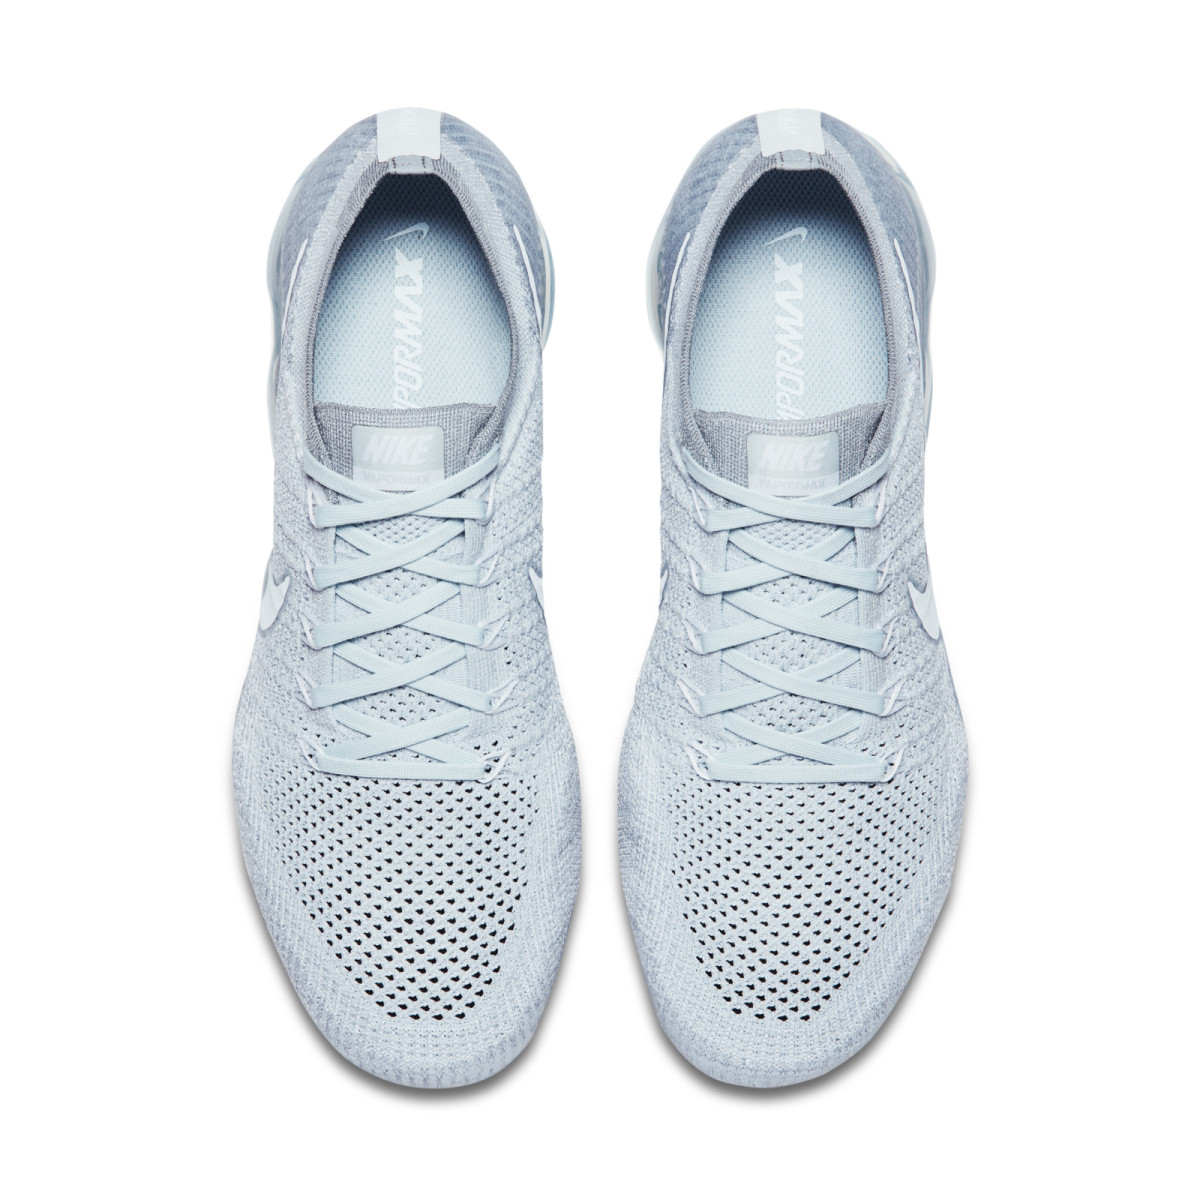 nike running shoes knit